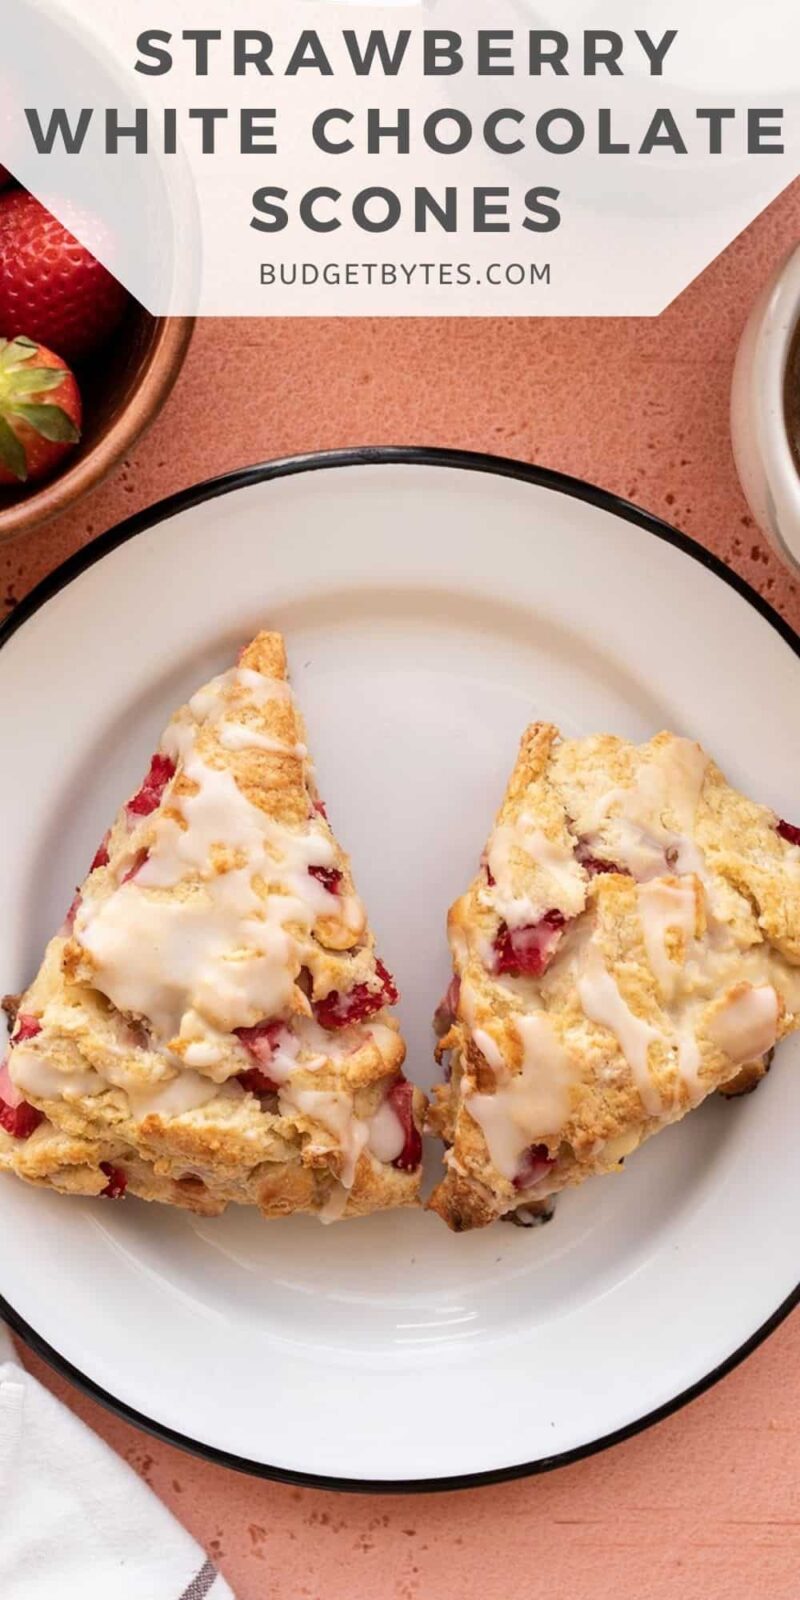 Two strawberry scones on a plate, title text at the top